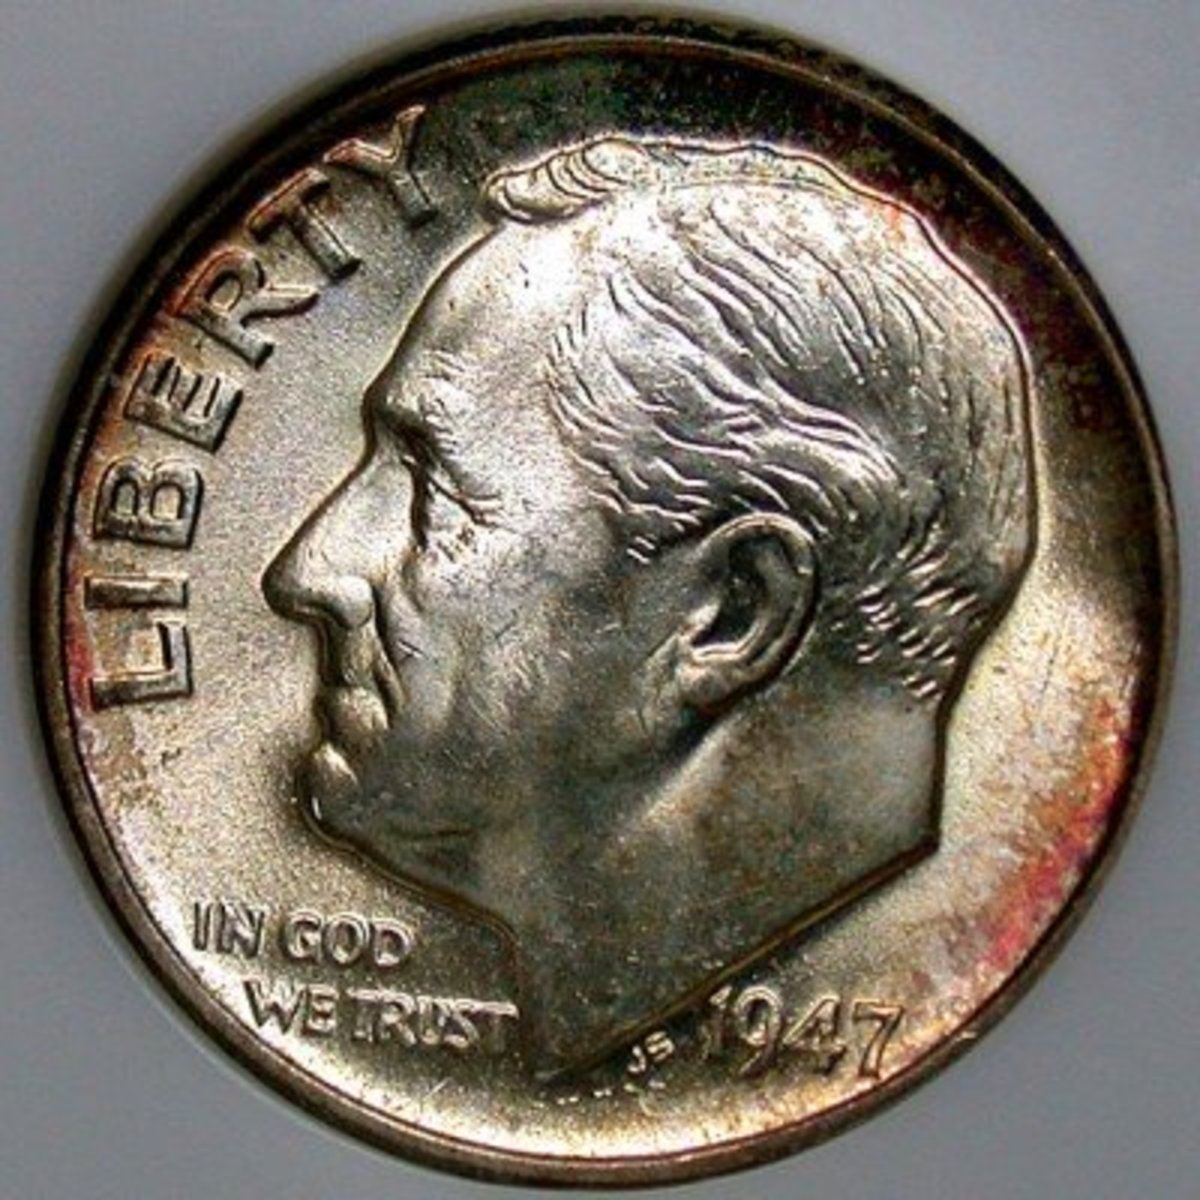 Roosevelt Dime Error List Hobbylark Games And Hobbies,Traditional Anniversary Gifts